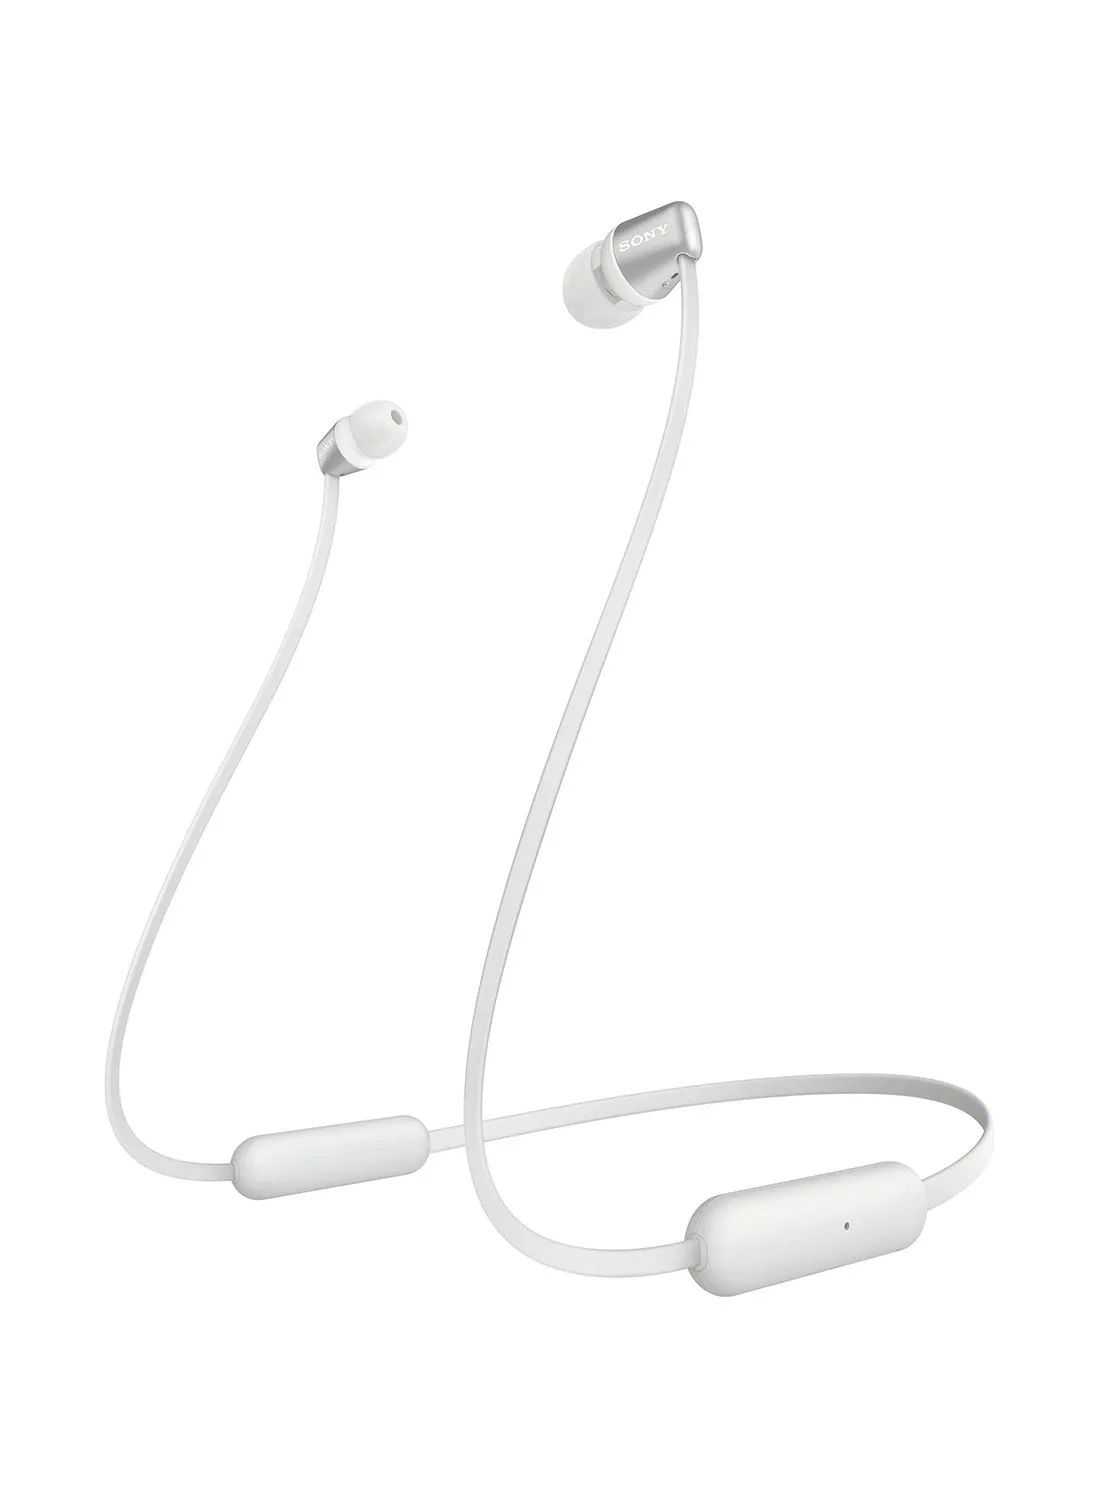 Sony WI-C310 Wireless In-Ear Bluetooth Headphones With Mic White